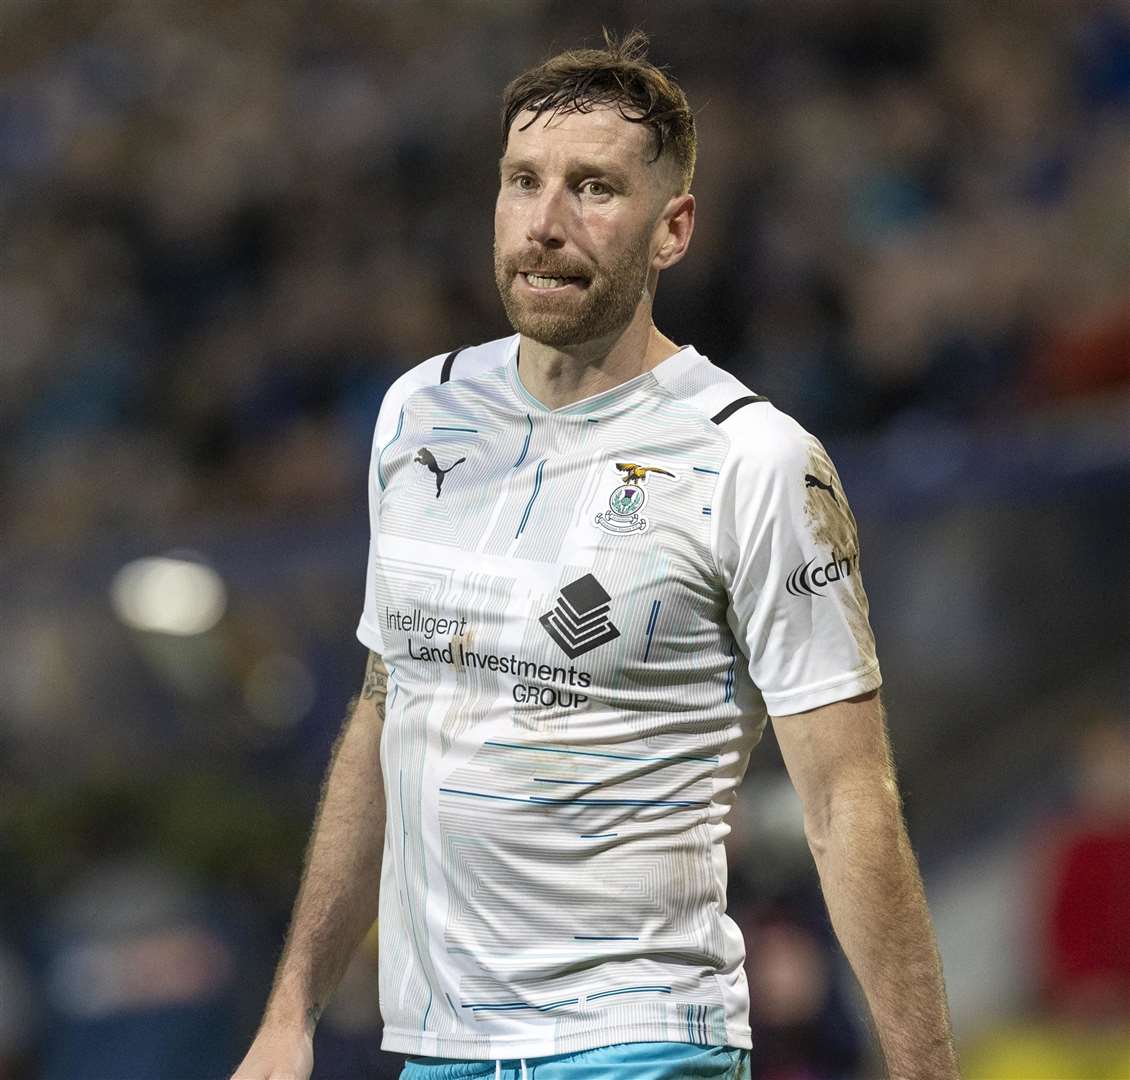 Picture - Ken Macpherson. Scottish Premiership Play-off Final. 2nd Leg. St. Johnstone(4) v Inverness CT(0). 23.05.22. ICT’s Kirk Broadfoot at the end.